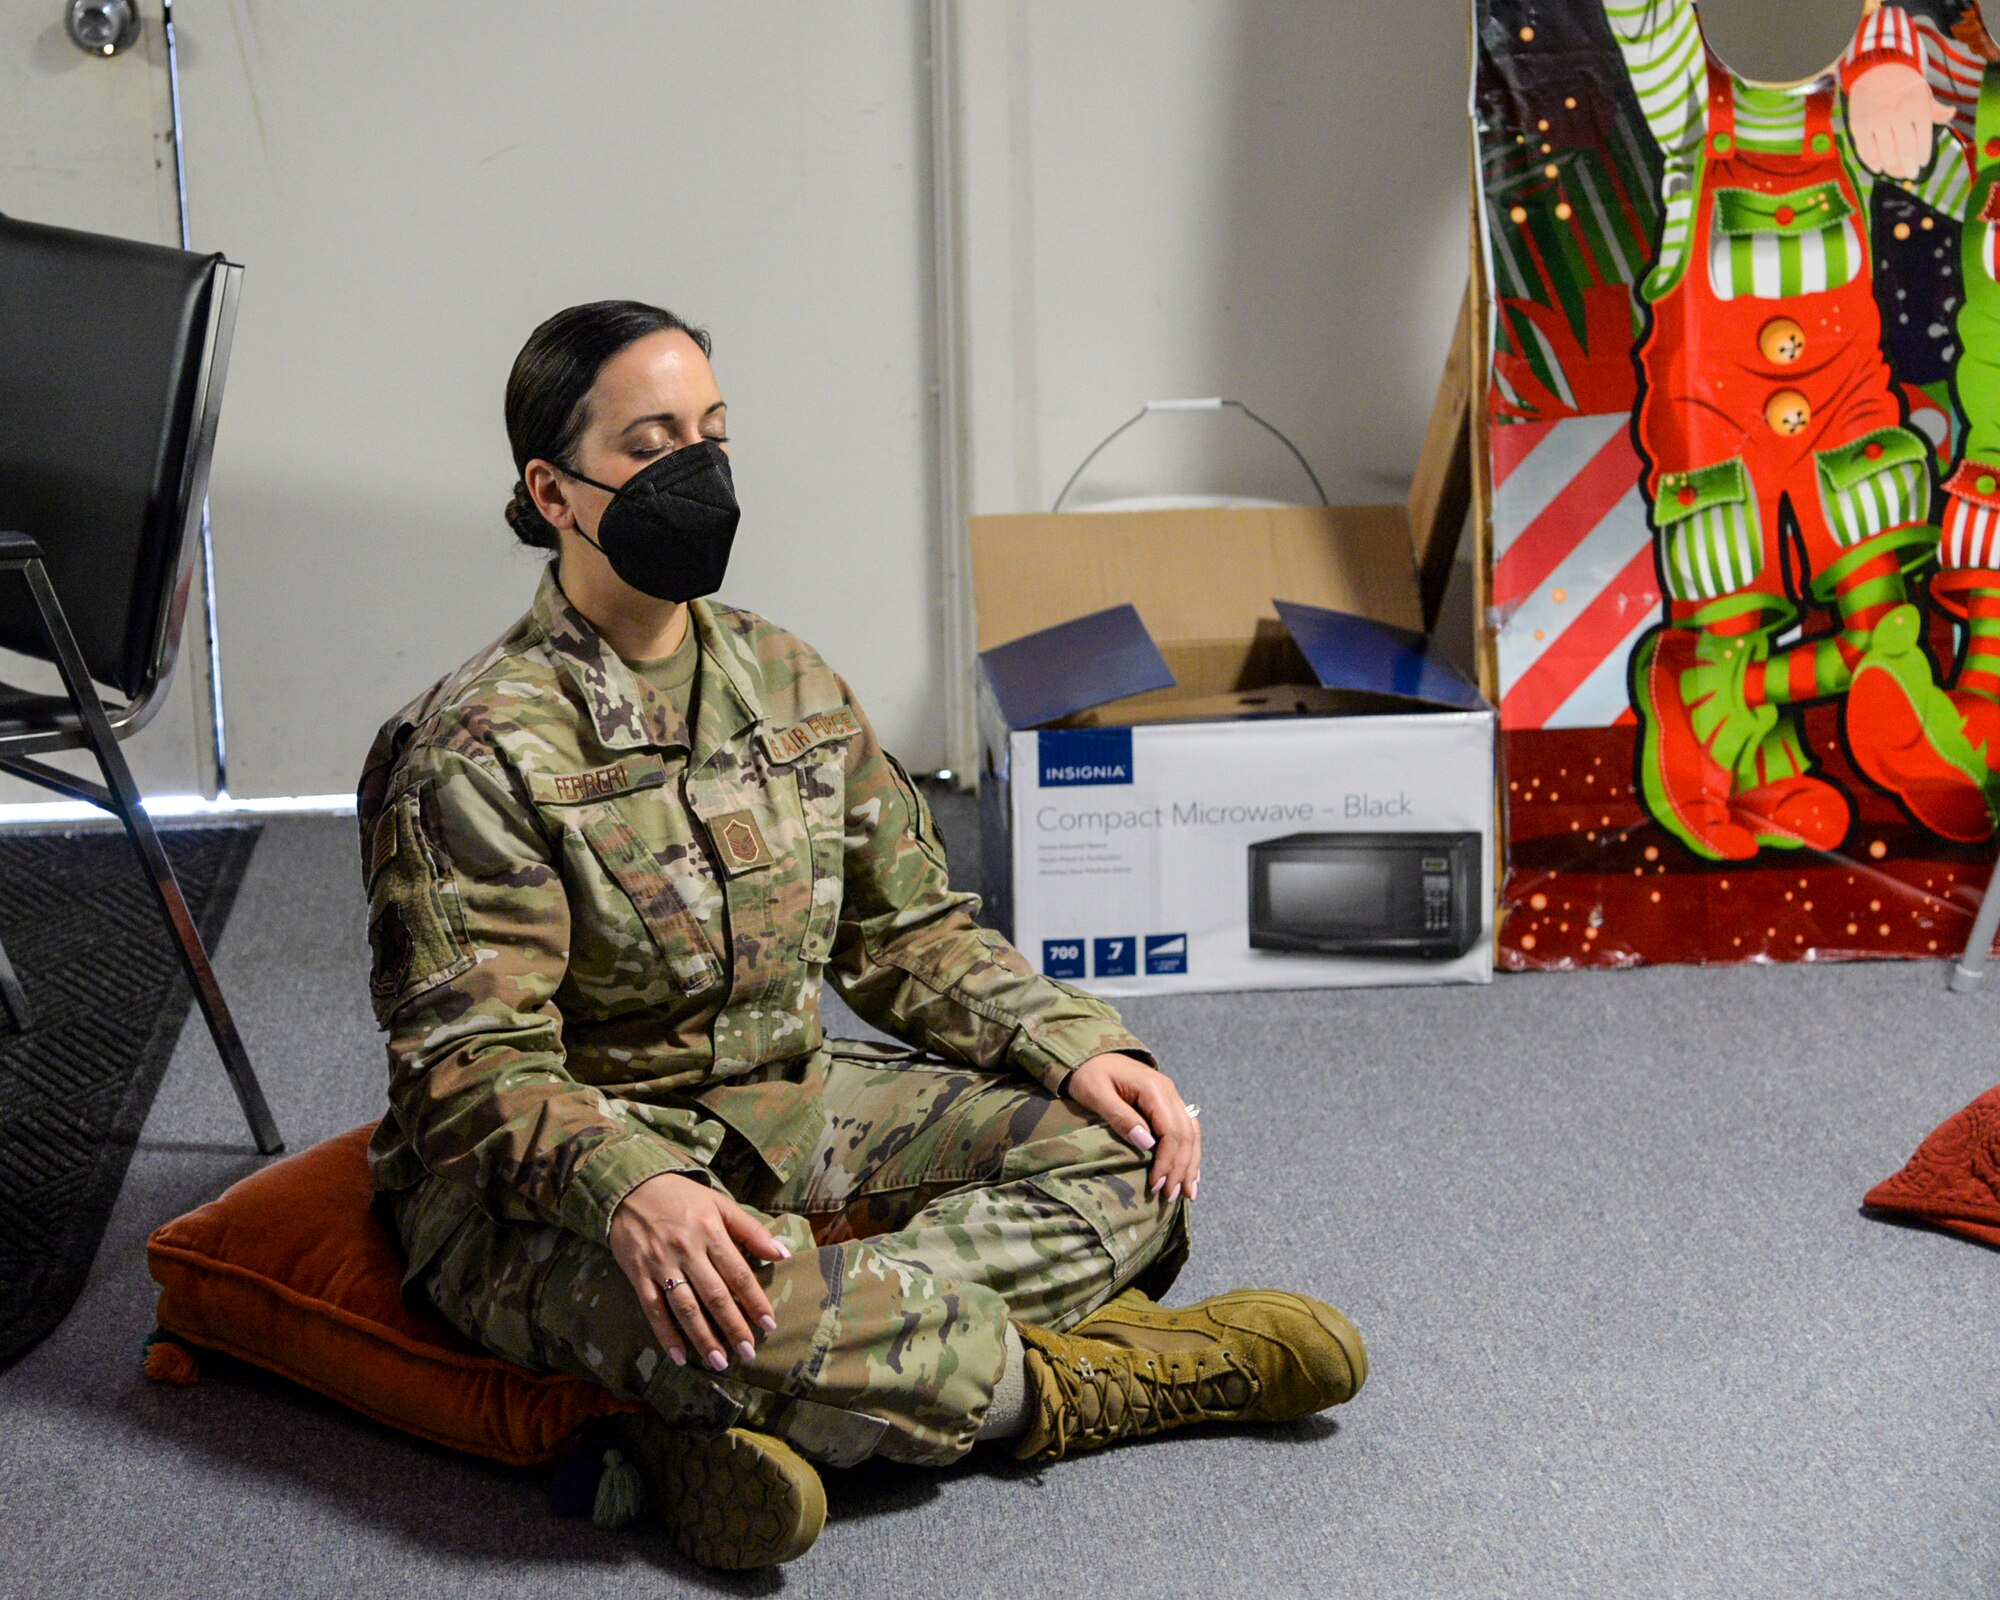 Master Sgt. Denise Ferreri, 177th Fighter Wing inspector general office inspector, participates in a mindfulness exercise